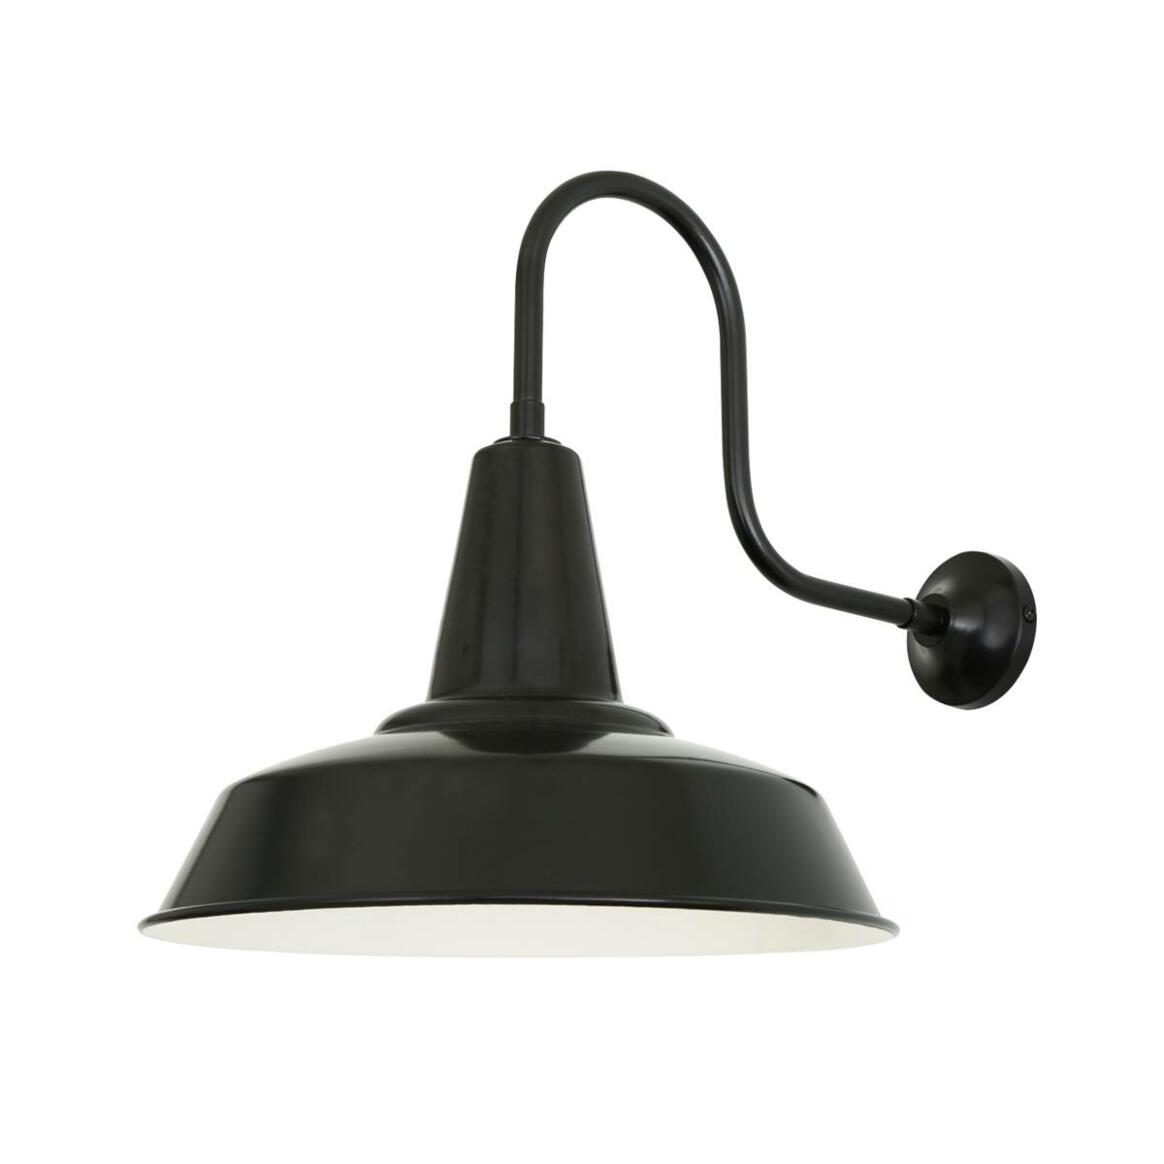 Hex Industrial Factory Swan Neck Wall Light main product image